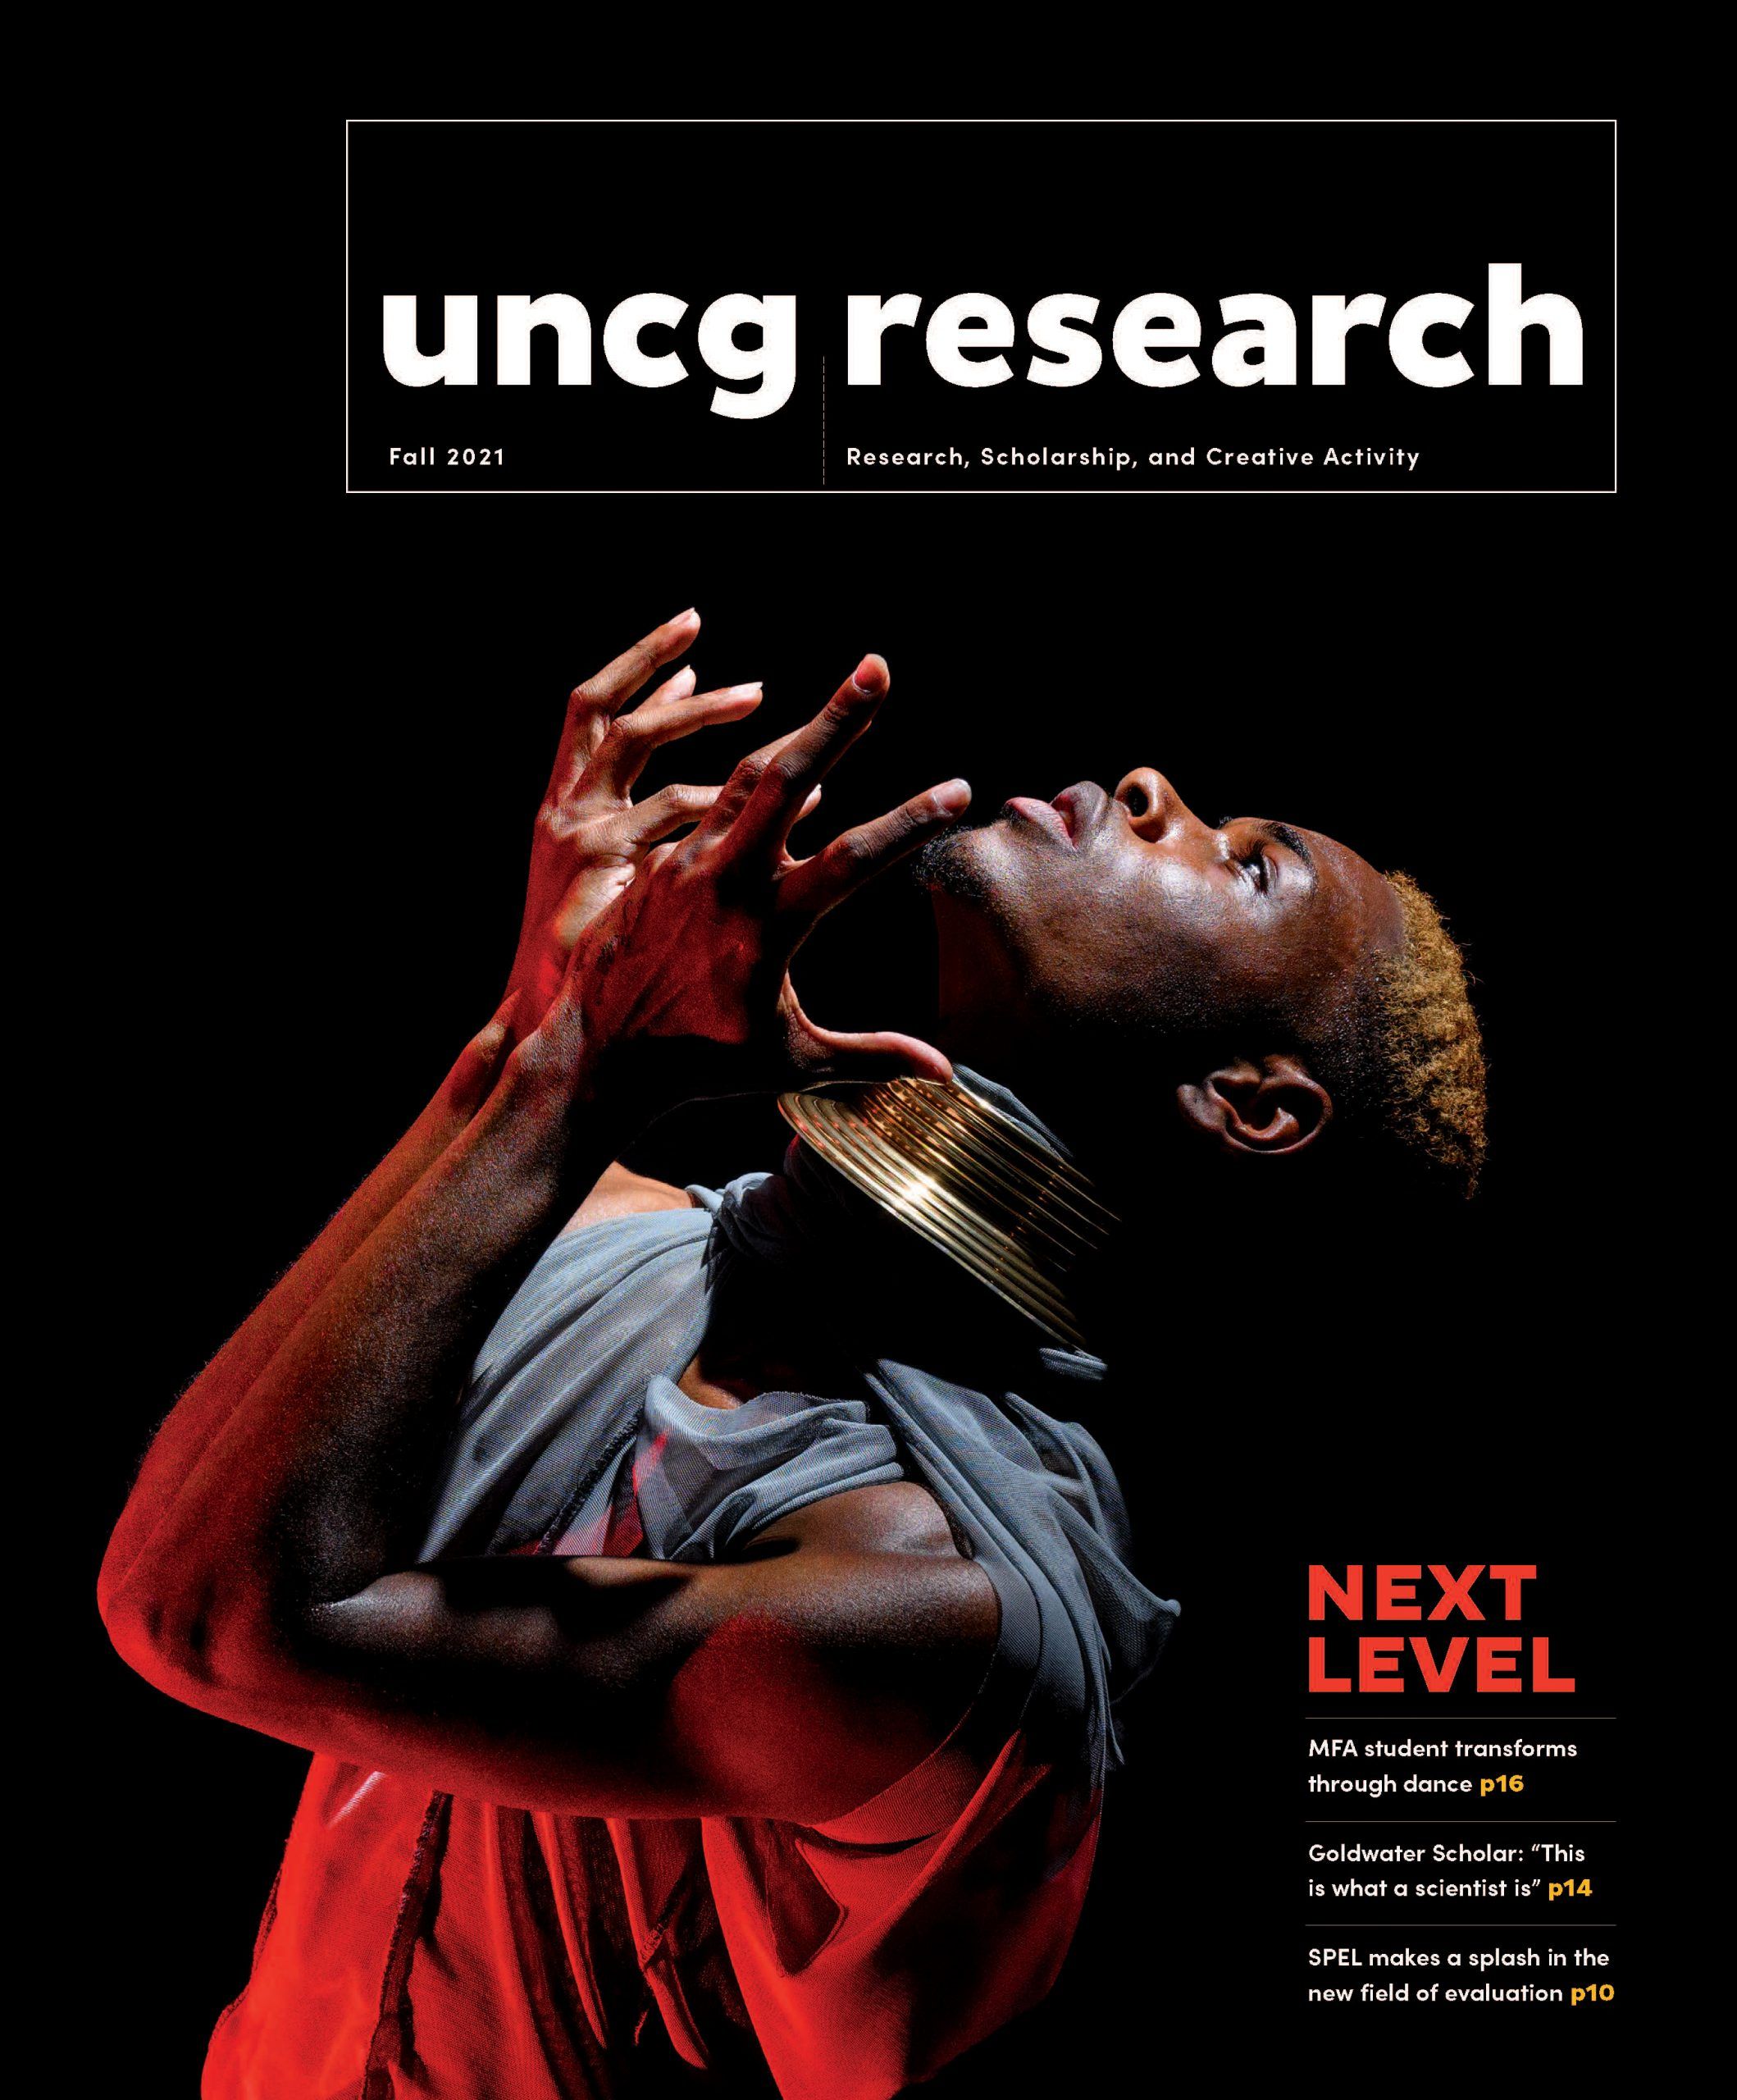 Cover of UNCG's Fall 2021 Research Magazine